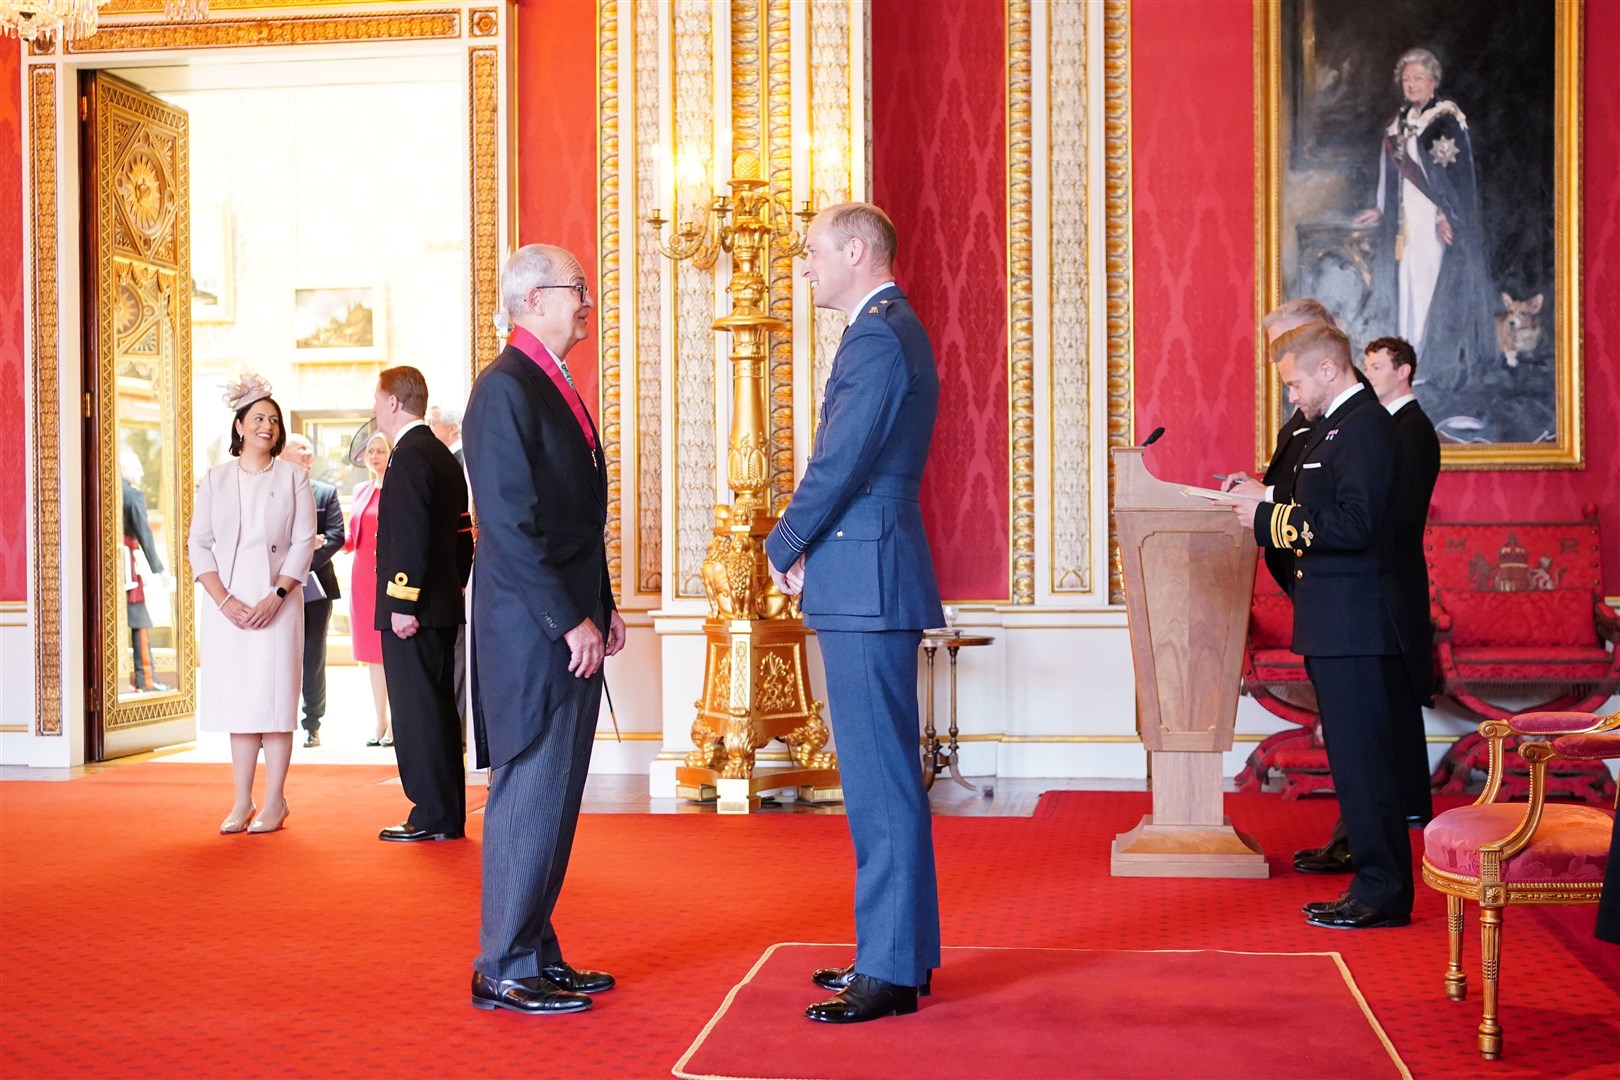 Sir Patrick Vallance is made a Knight Commander of the Order of the Bath by the Duke of Cambridge at Buckingham Palace (Dominic Lipinski/PA)